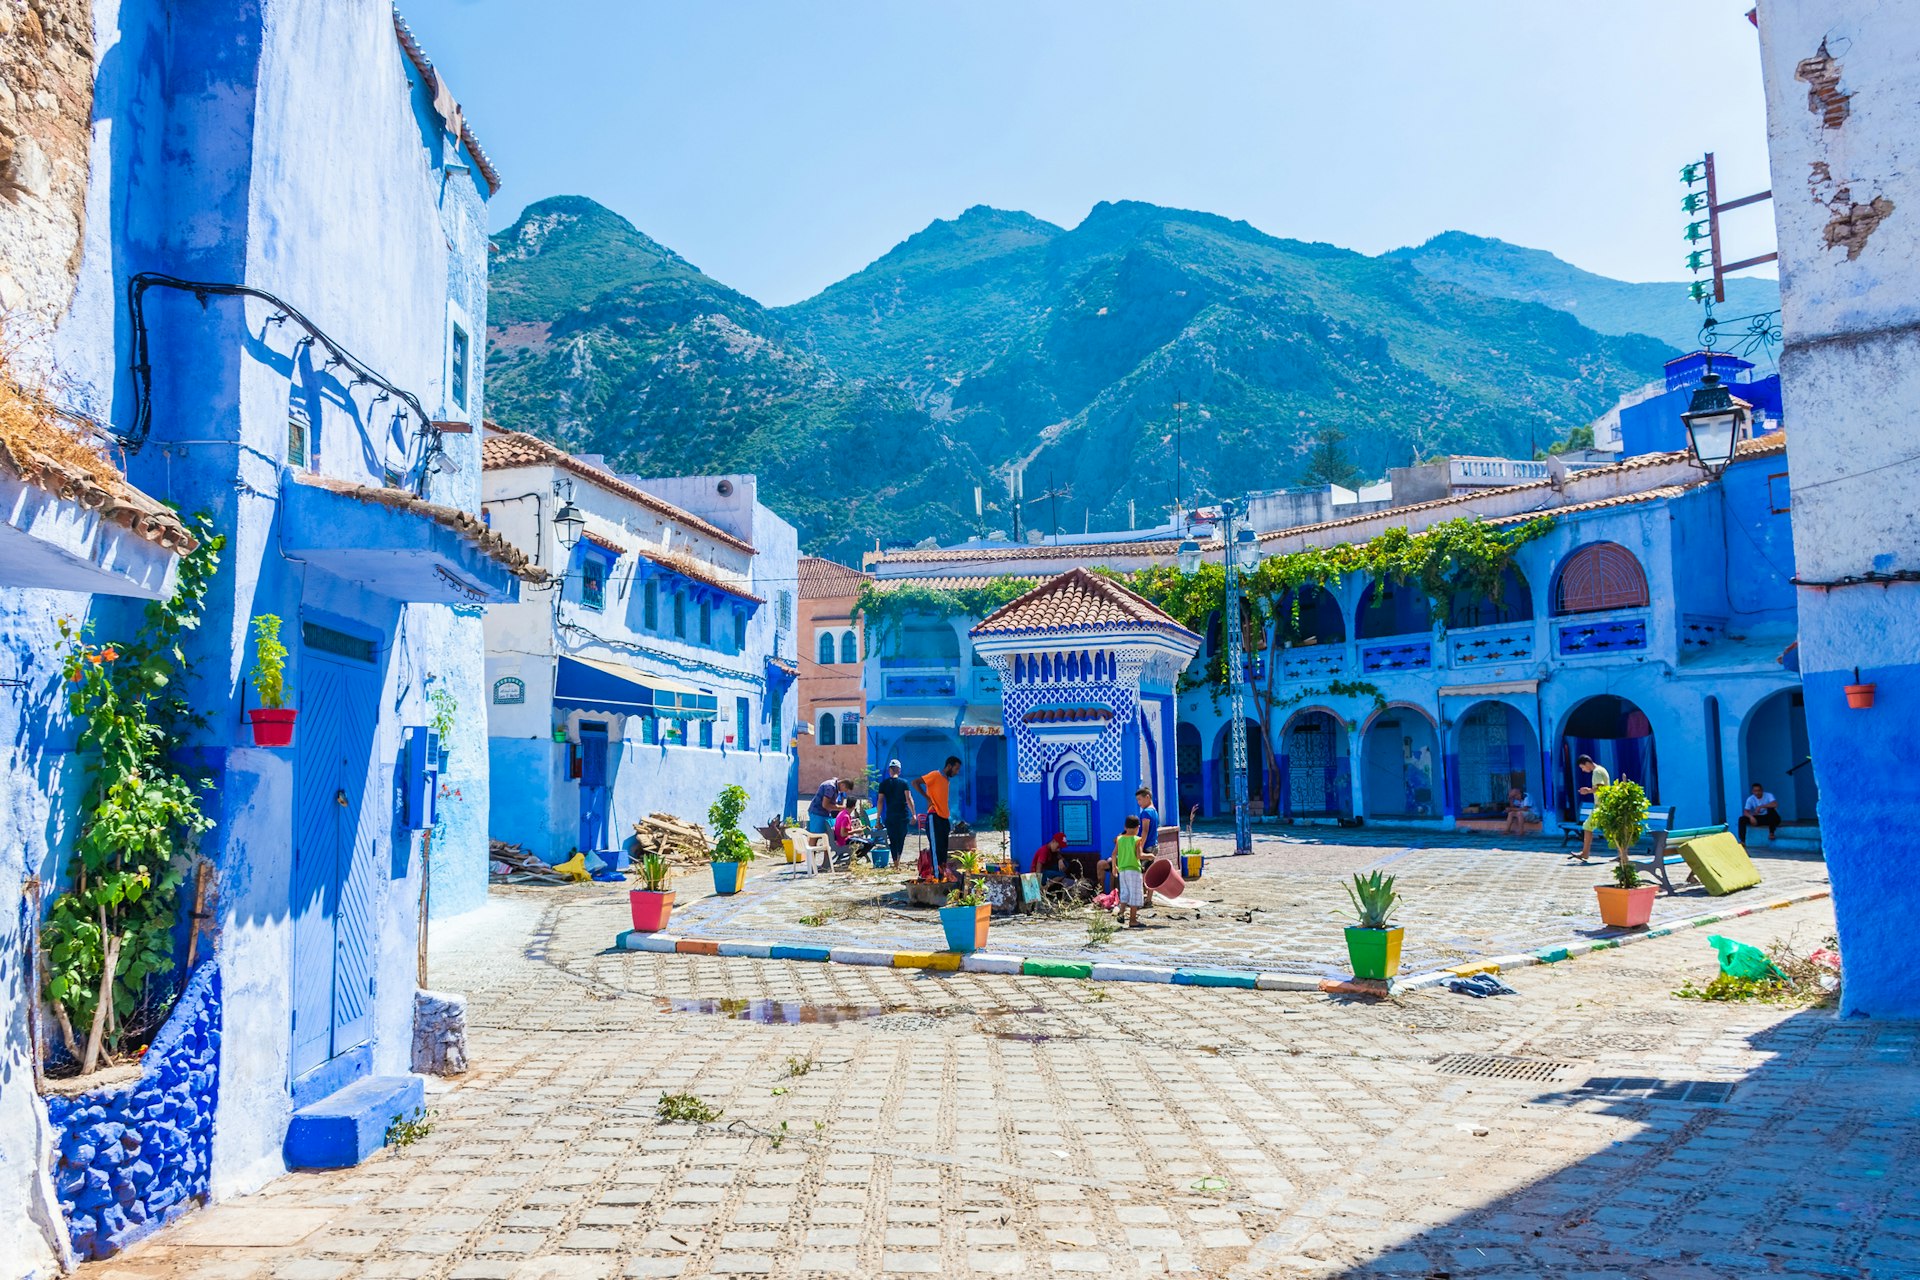 A small cobbled square surrounded by low-rise buildings that are painted blue. Mountain peaks rise in the distance